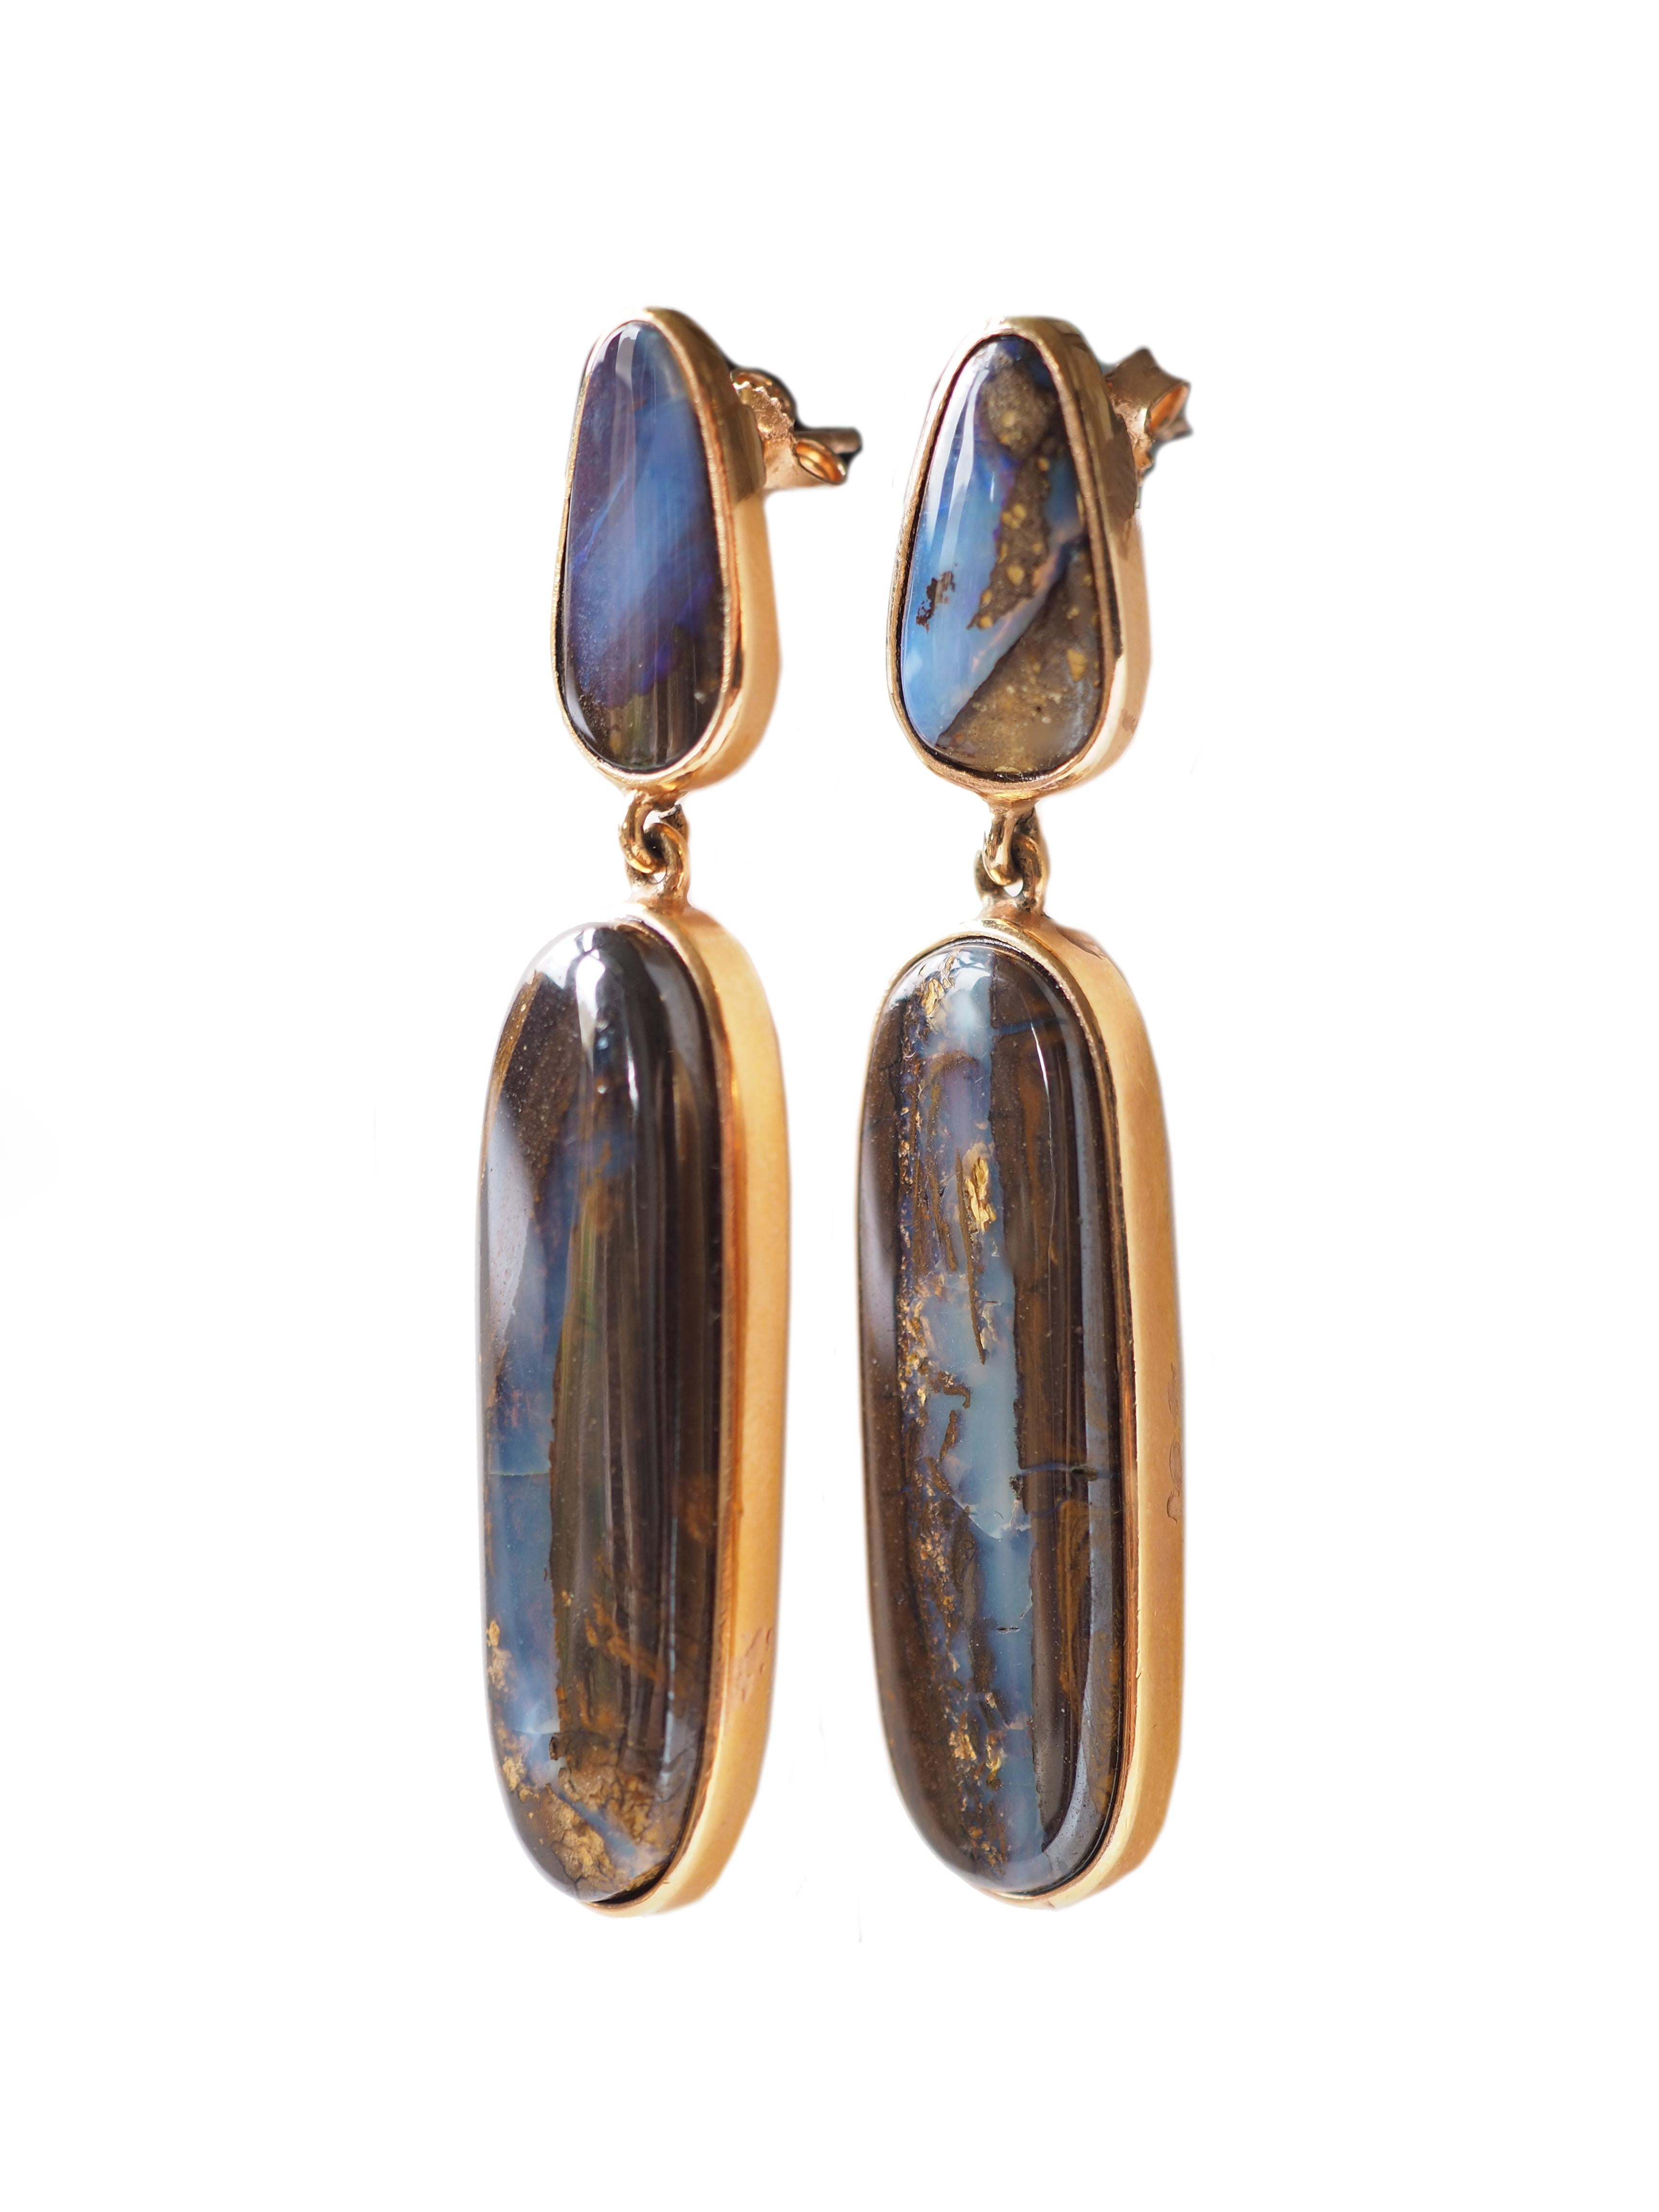 Opal Australian Opal  Bronze Earrings, length cm 7.
All Giulia Colussi jewelry is new and has never been previously owned or worn. Each item will arrive at your door beautifully gift wrapped in our boxes, put inside an elegant pouch or jewel box.
